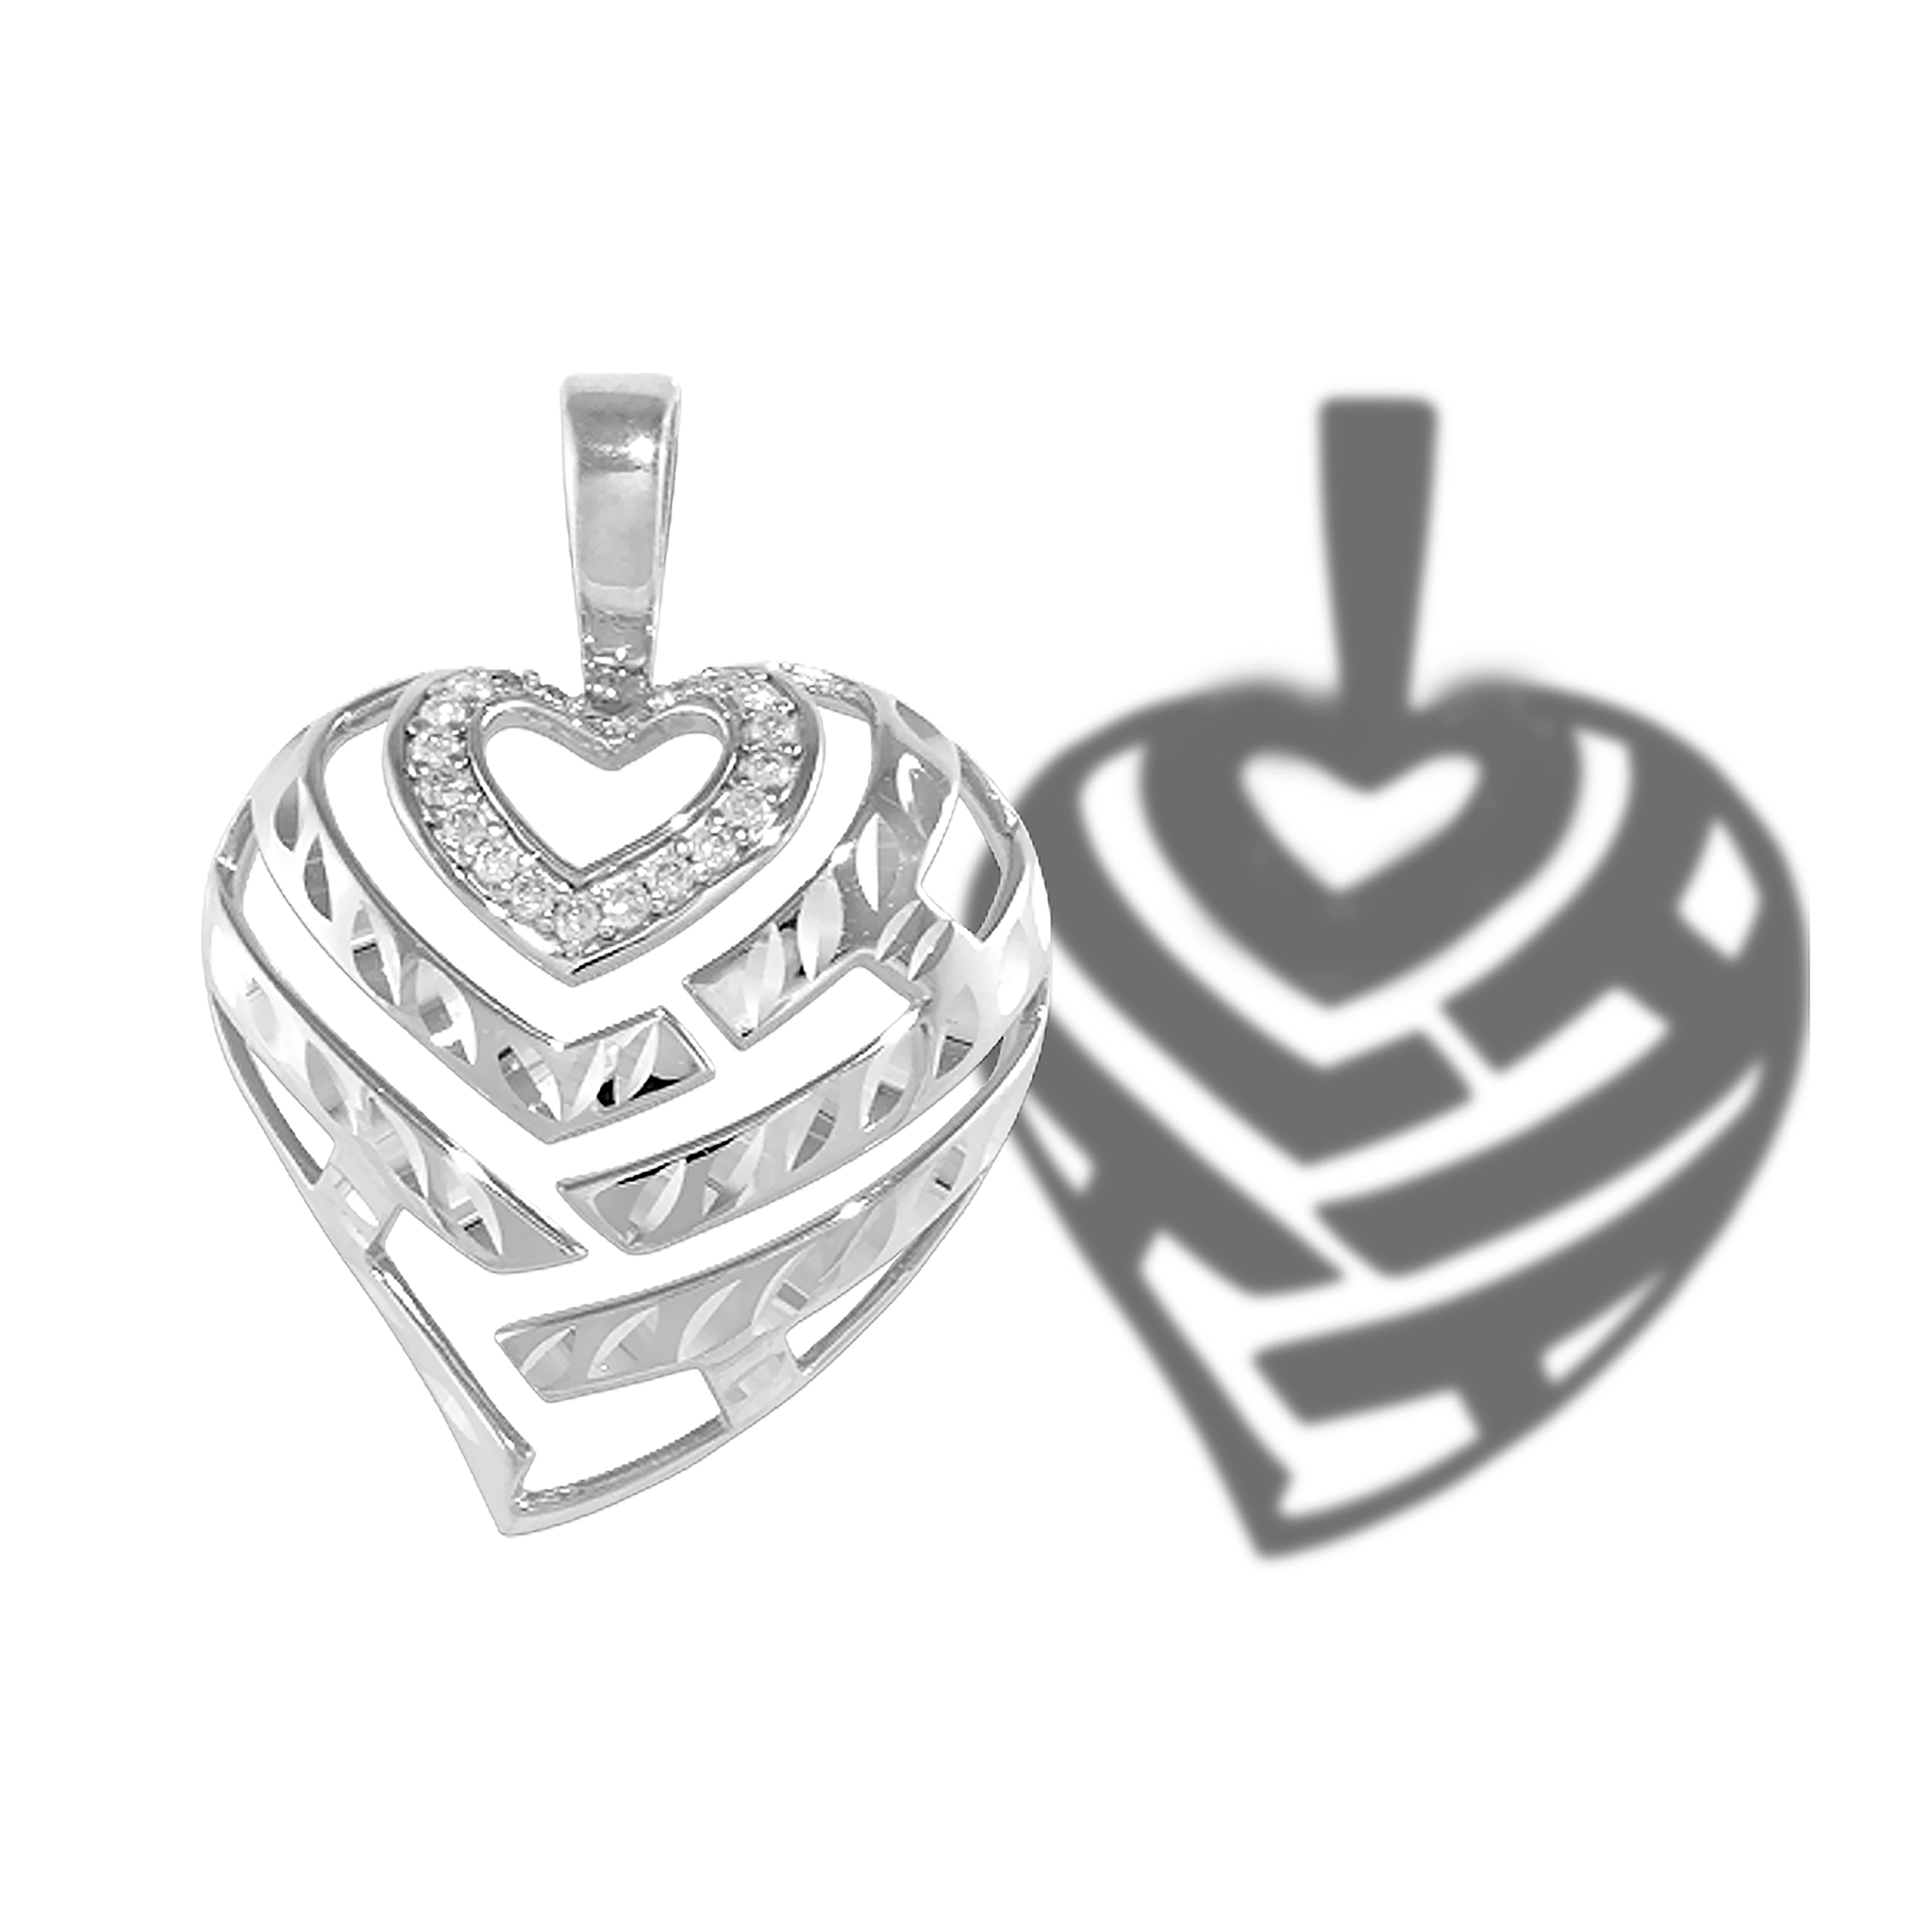 Aloha Heart Pendant in White Gold with Diamonds - 24mm